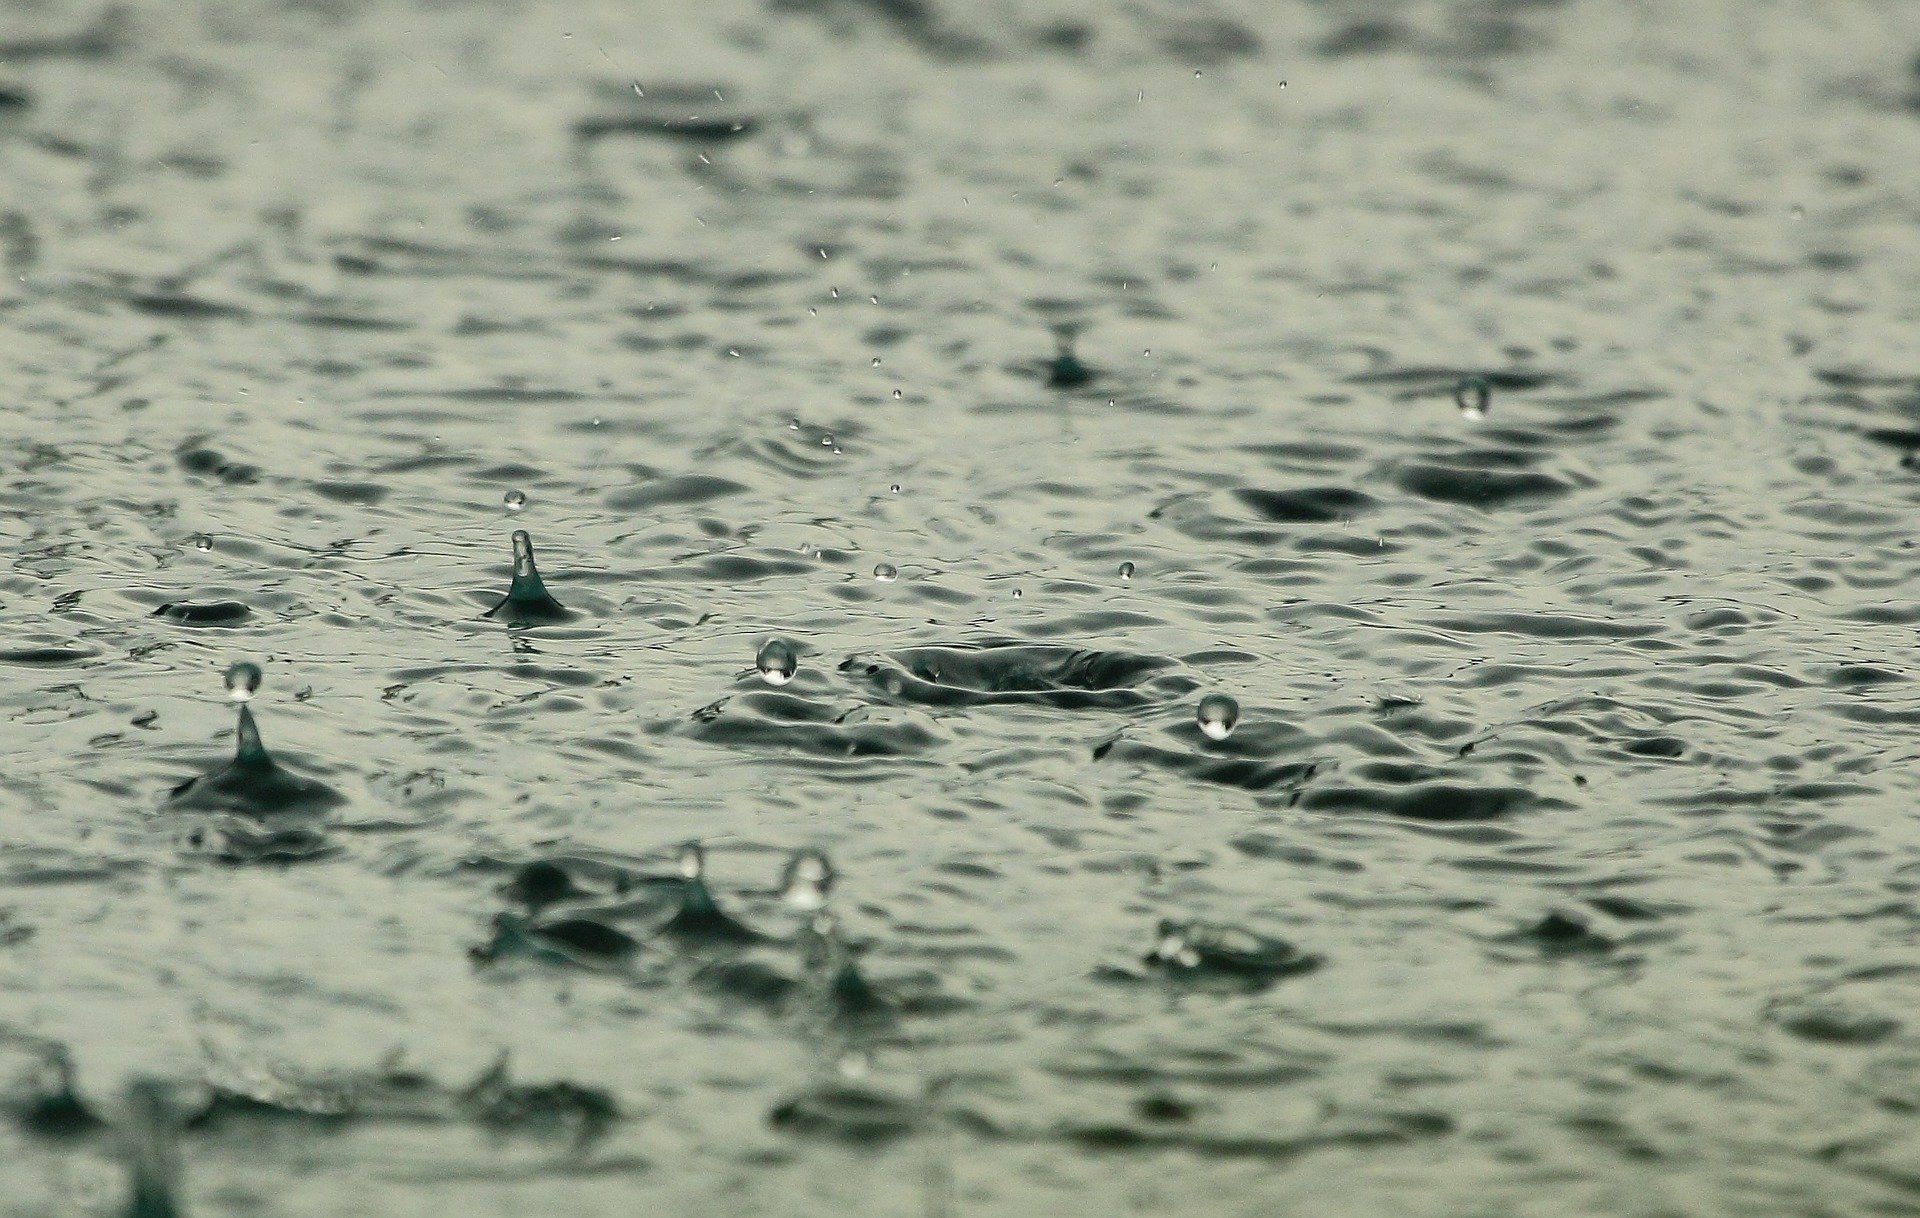 rainfall in water picture